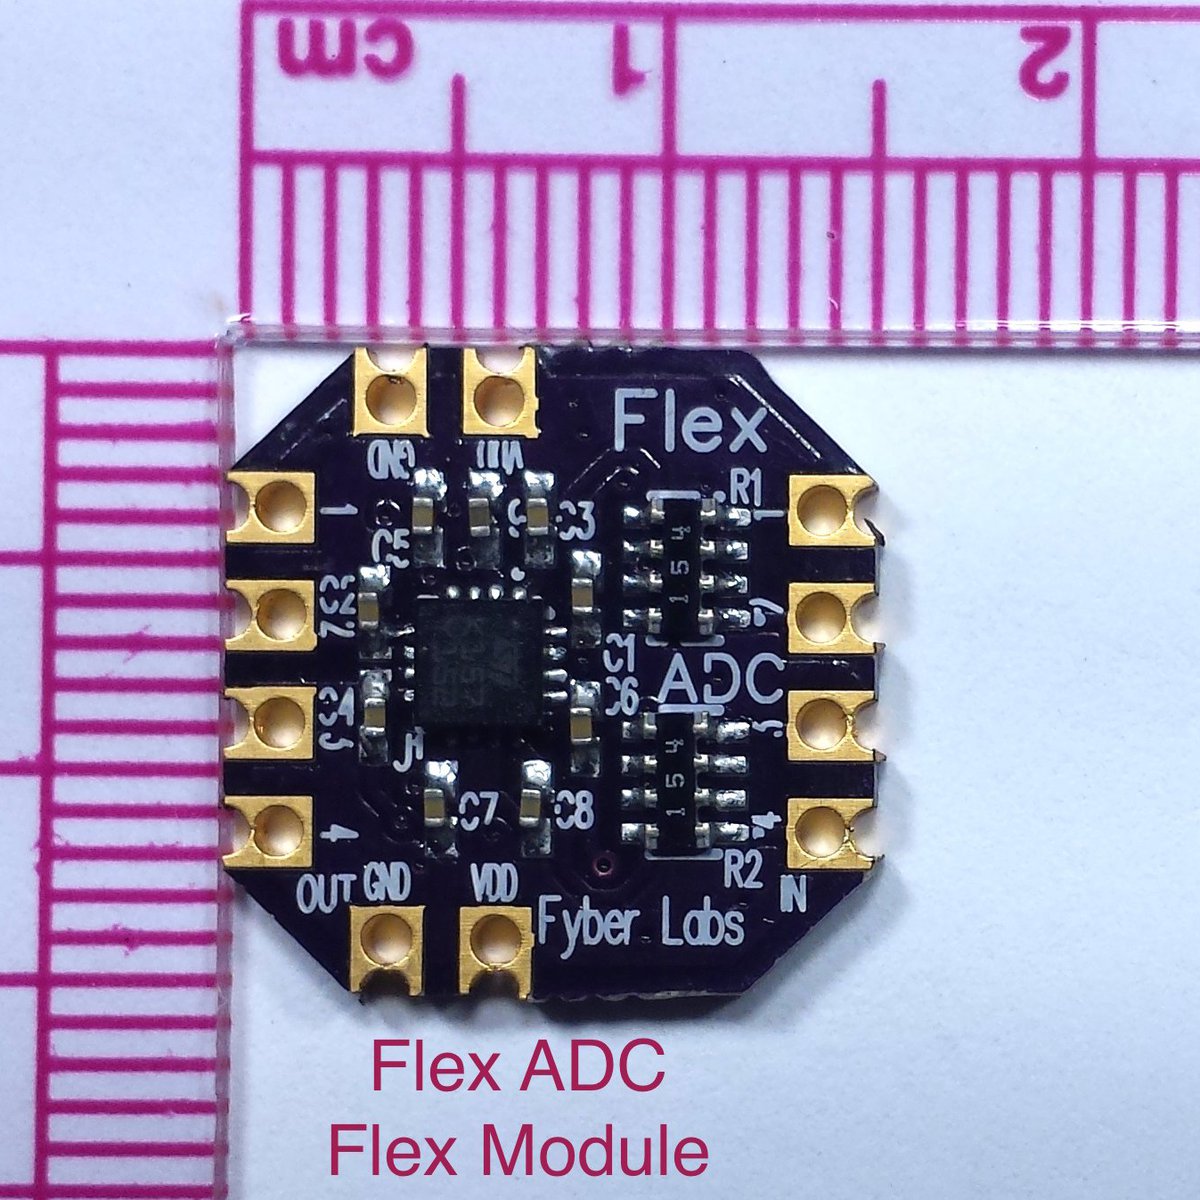 Flex ADC Flex Module from Fyber Labs Inc. on Tindie